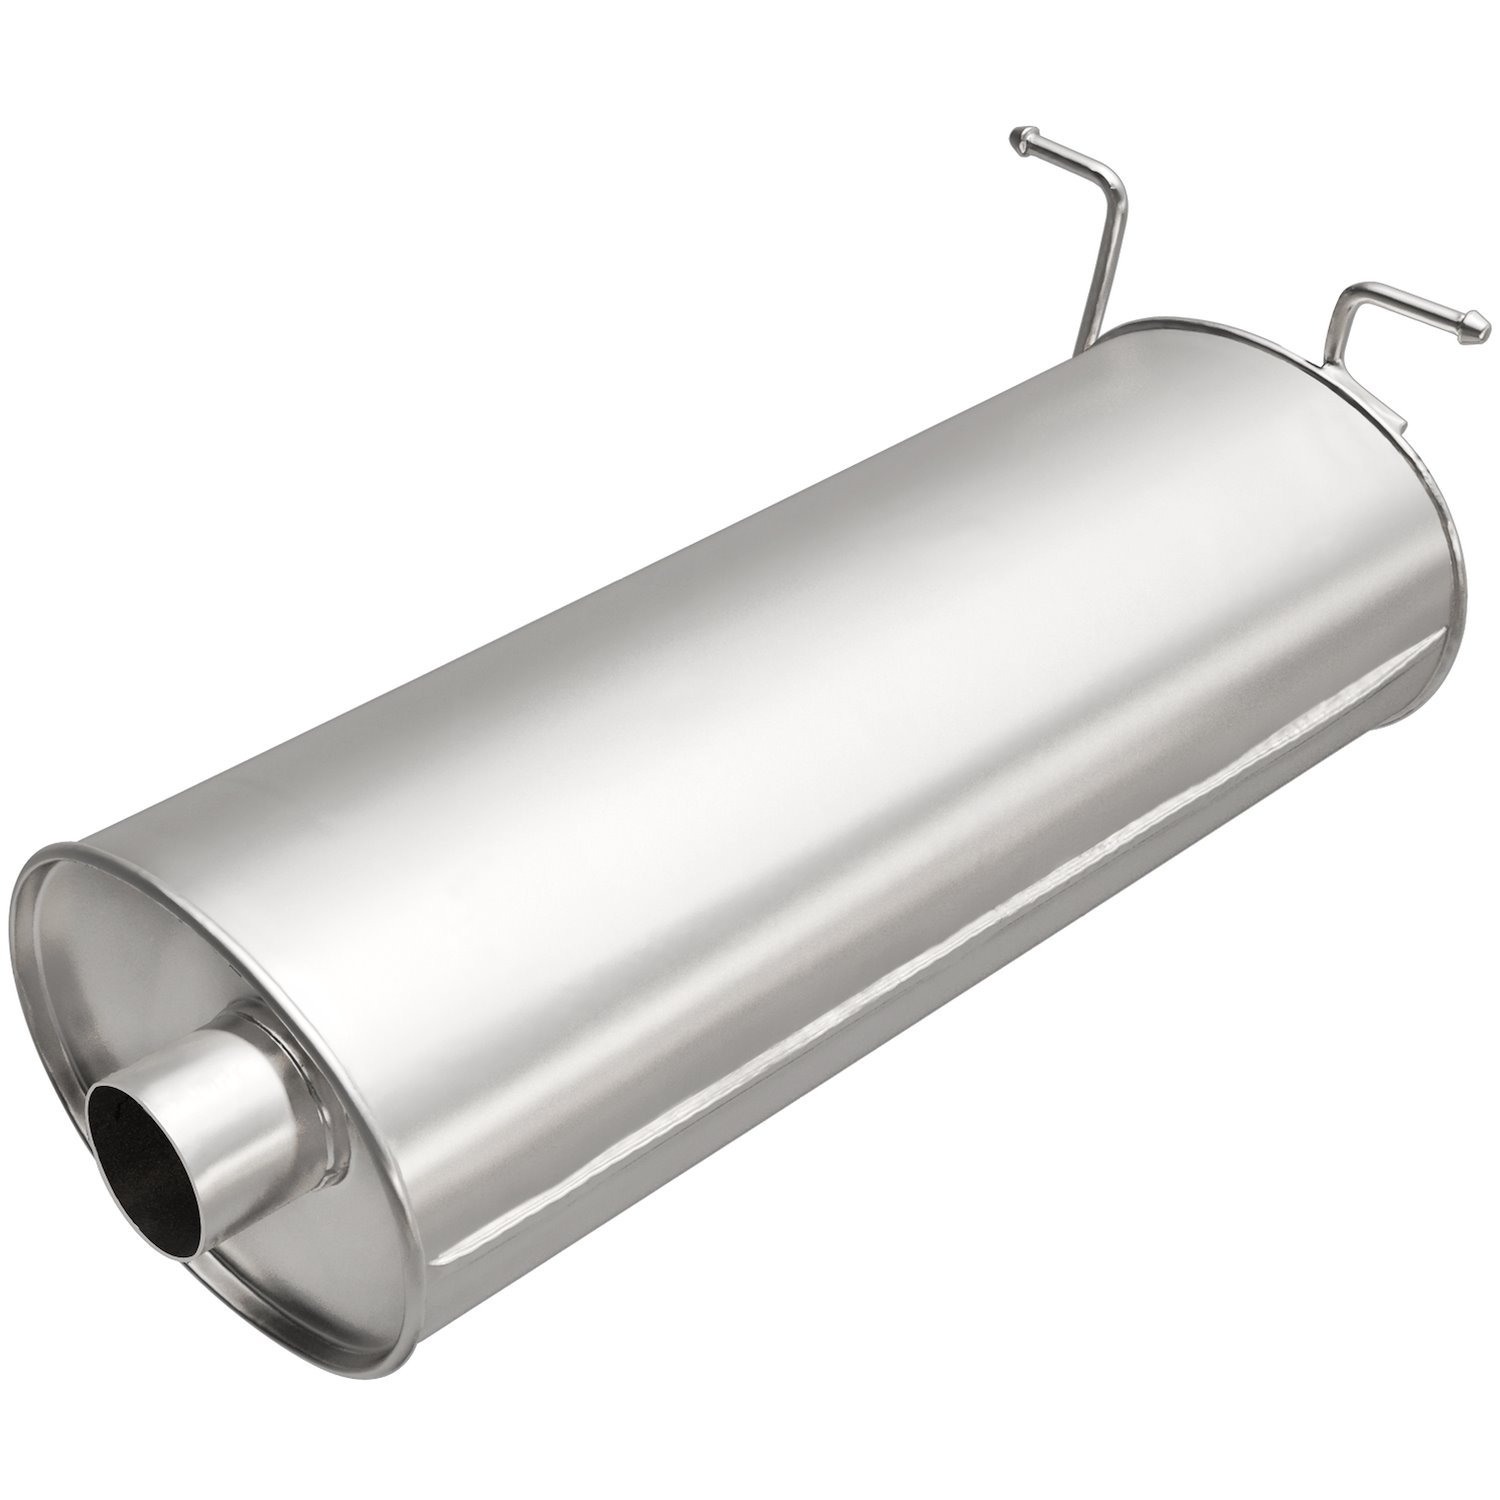 Direct-Fit Exhaust Muffler, 1999-2002 Ford Expedition, Lincoln Navigator